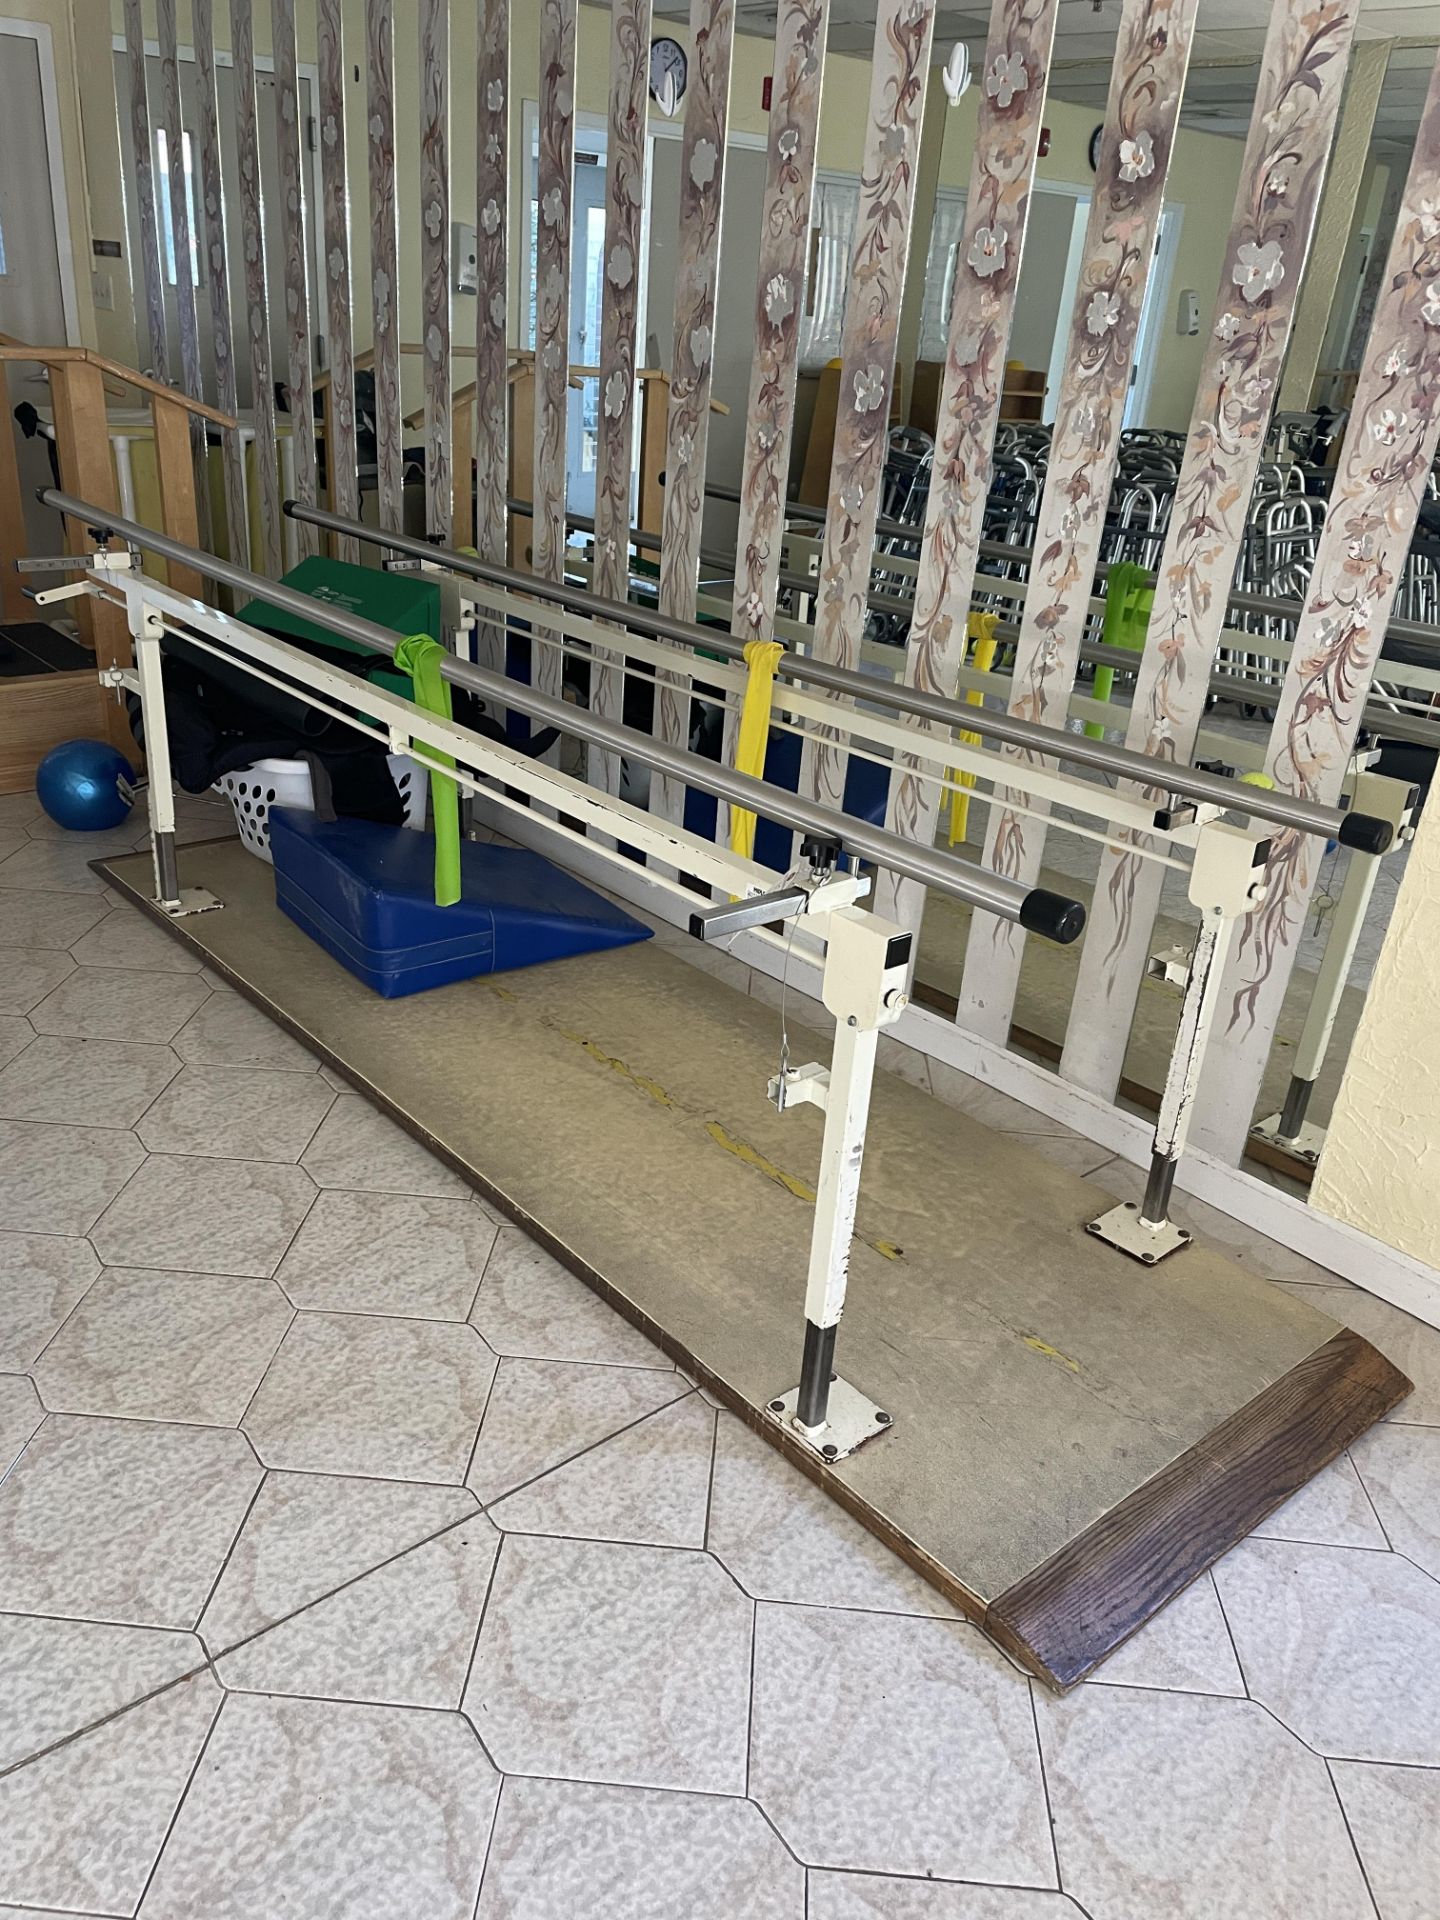 {LOT} Midland Adjustable Handle Balance Physical Therapy Walk Training Unit, 10' w/Built in Platform - Image 3 of 4